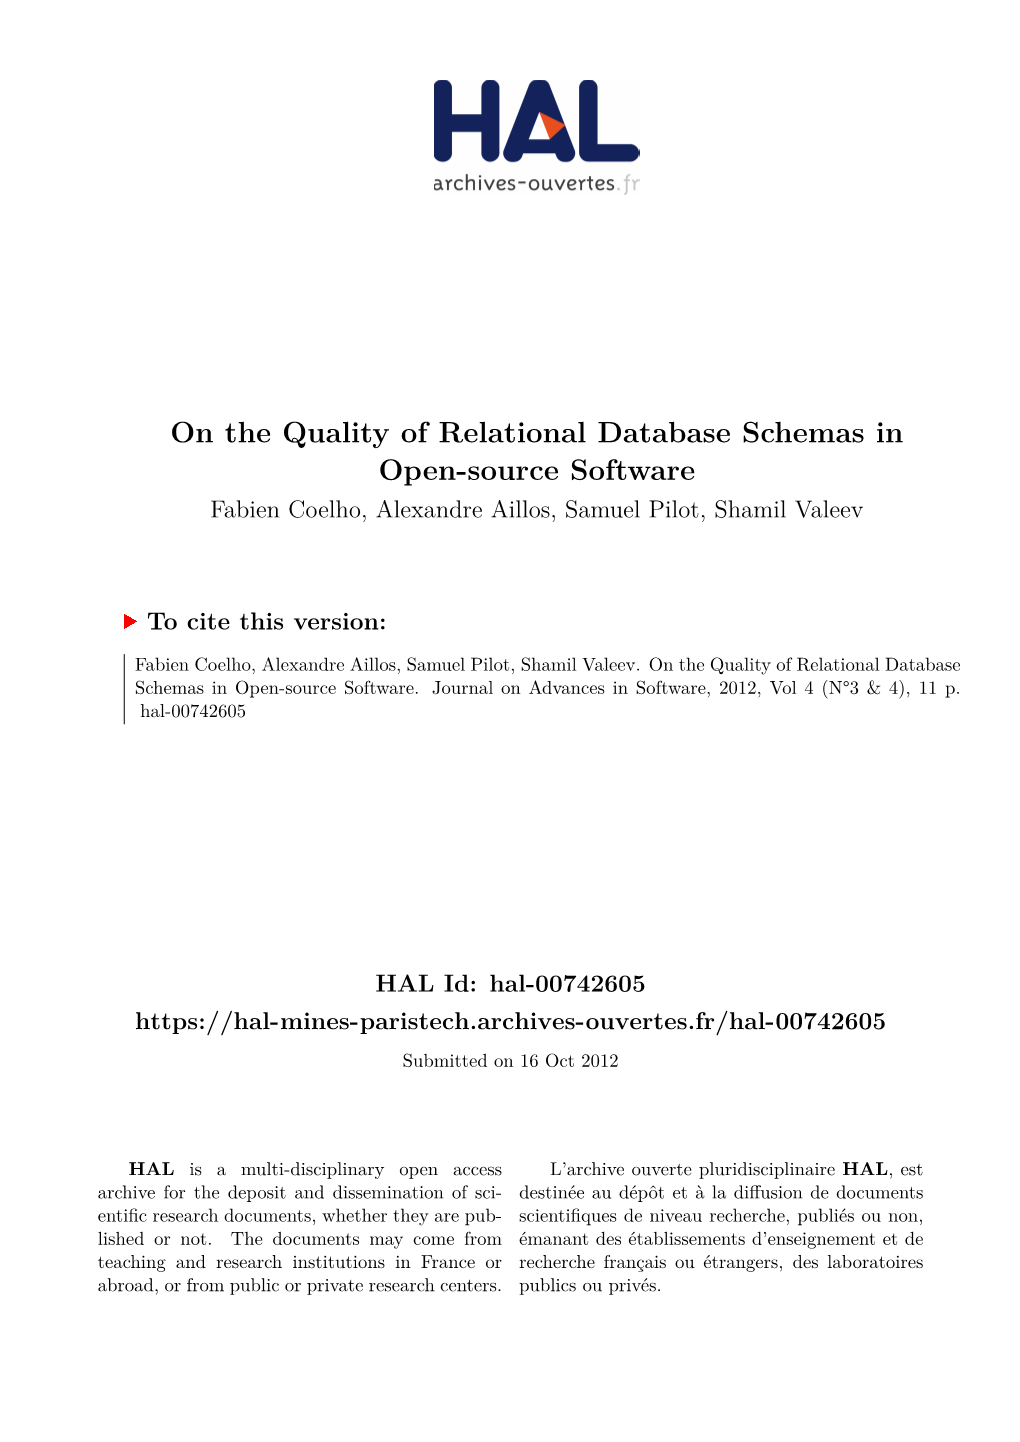 On the Quality of Relational Database Schemas in Open-Source Software Fabien Coelho, Alexandre Aillos, Samuel Pilot, Shamil Valeev